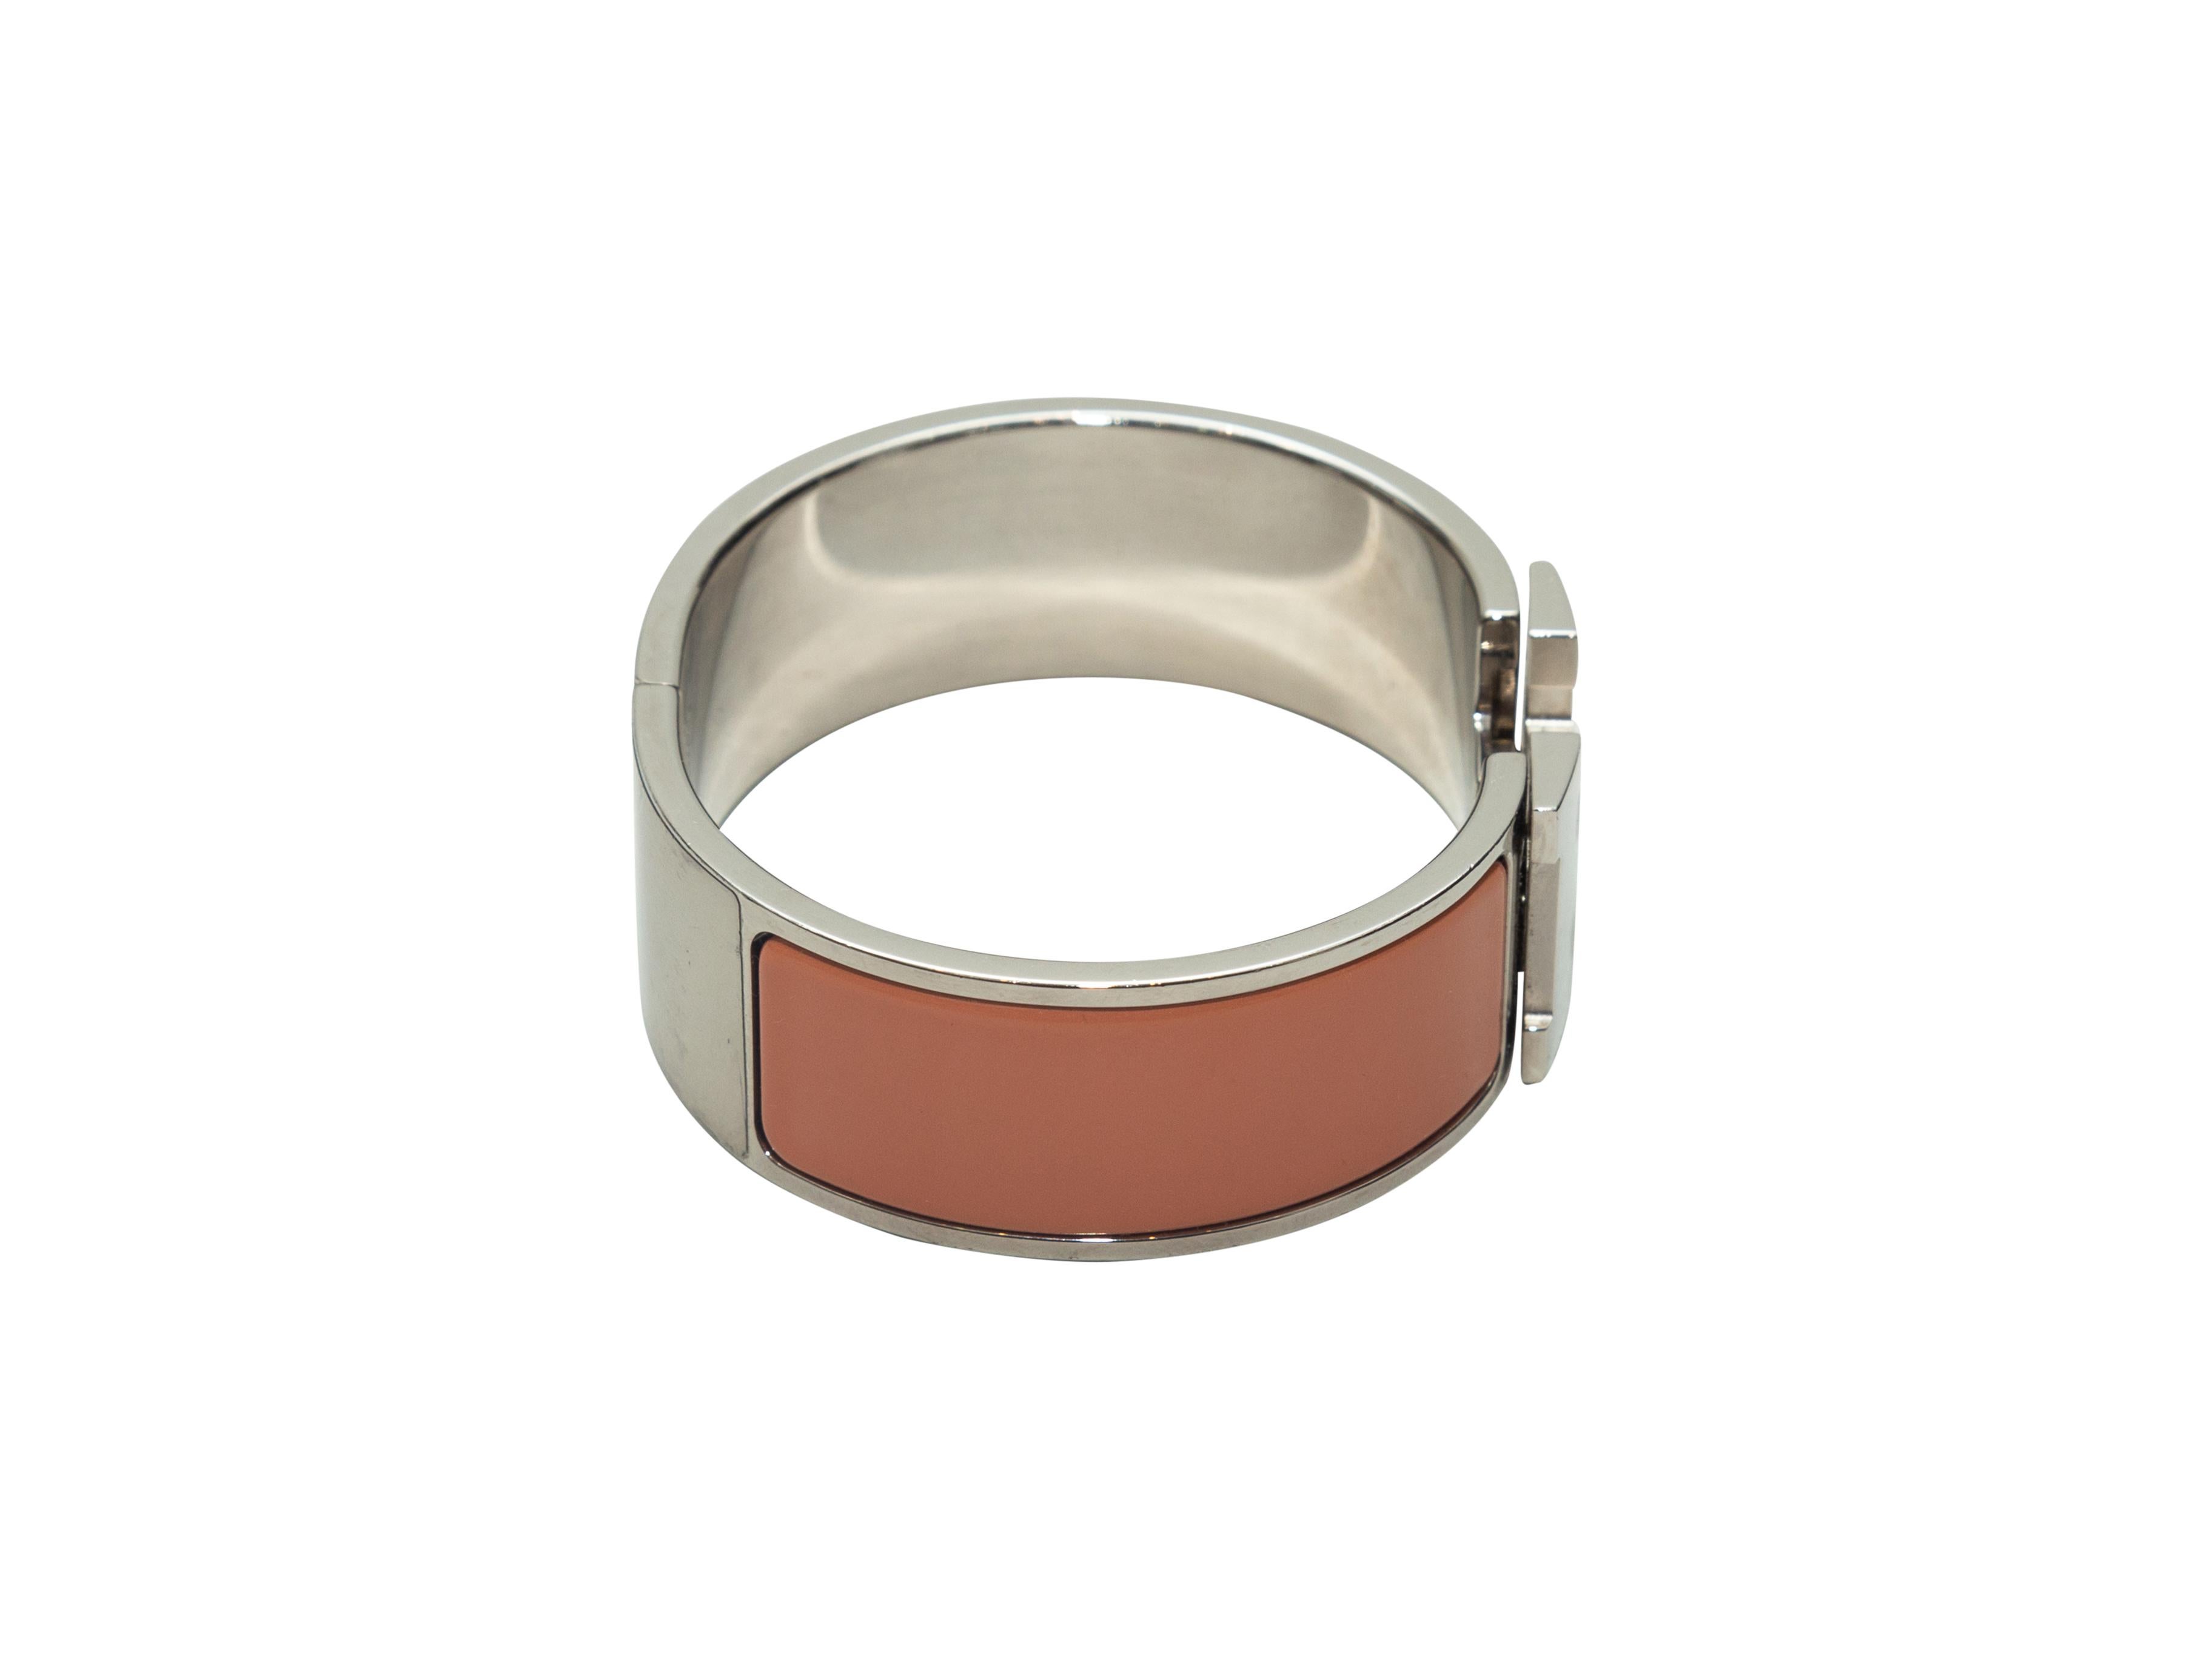 Product details: Peach leather and silver palladium Clic Clac bracelet by Hermes. 7.5